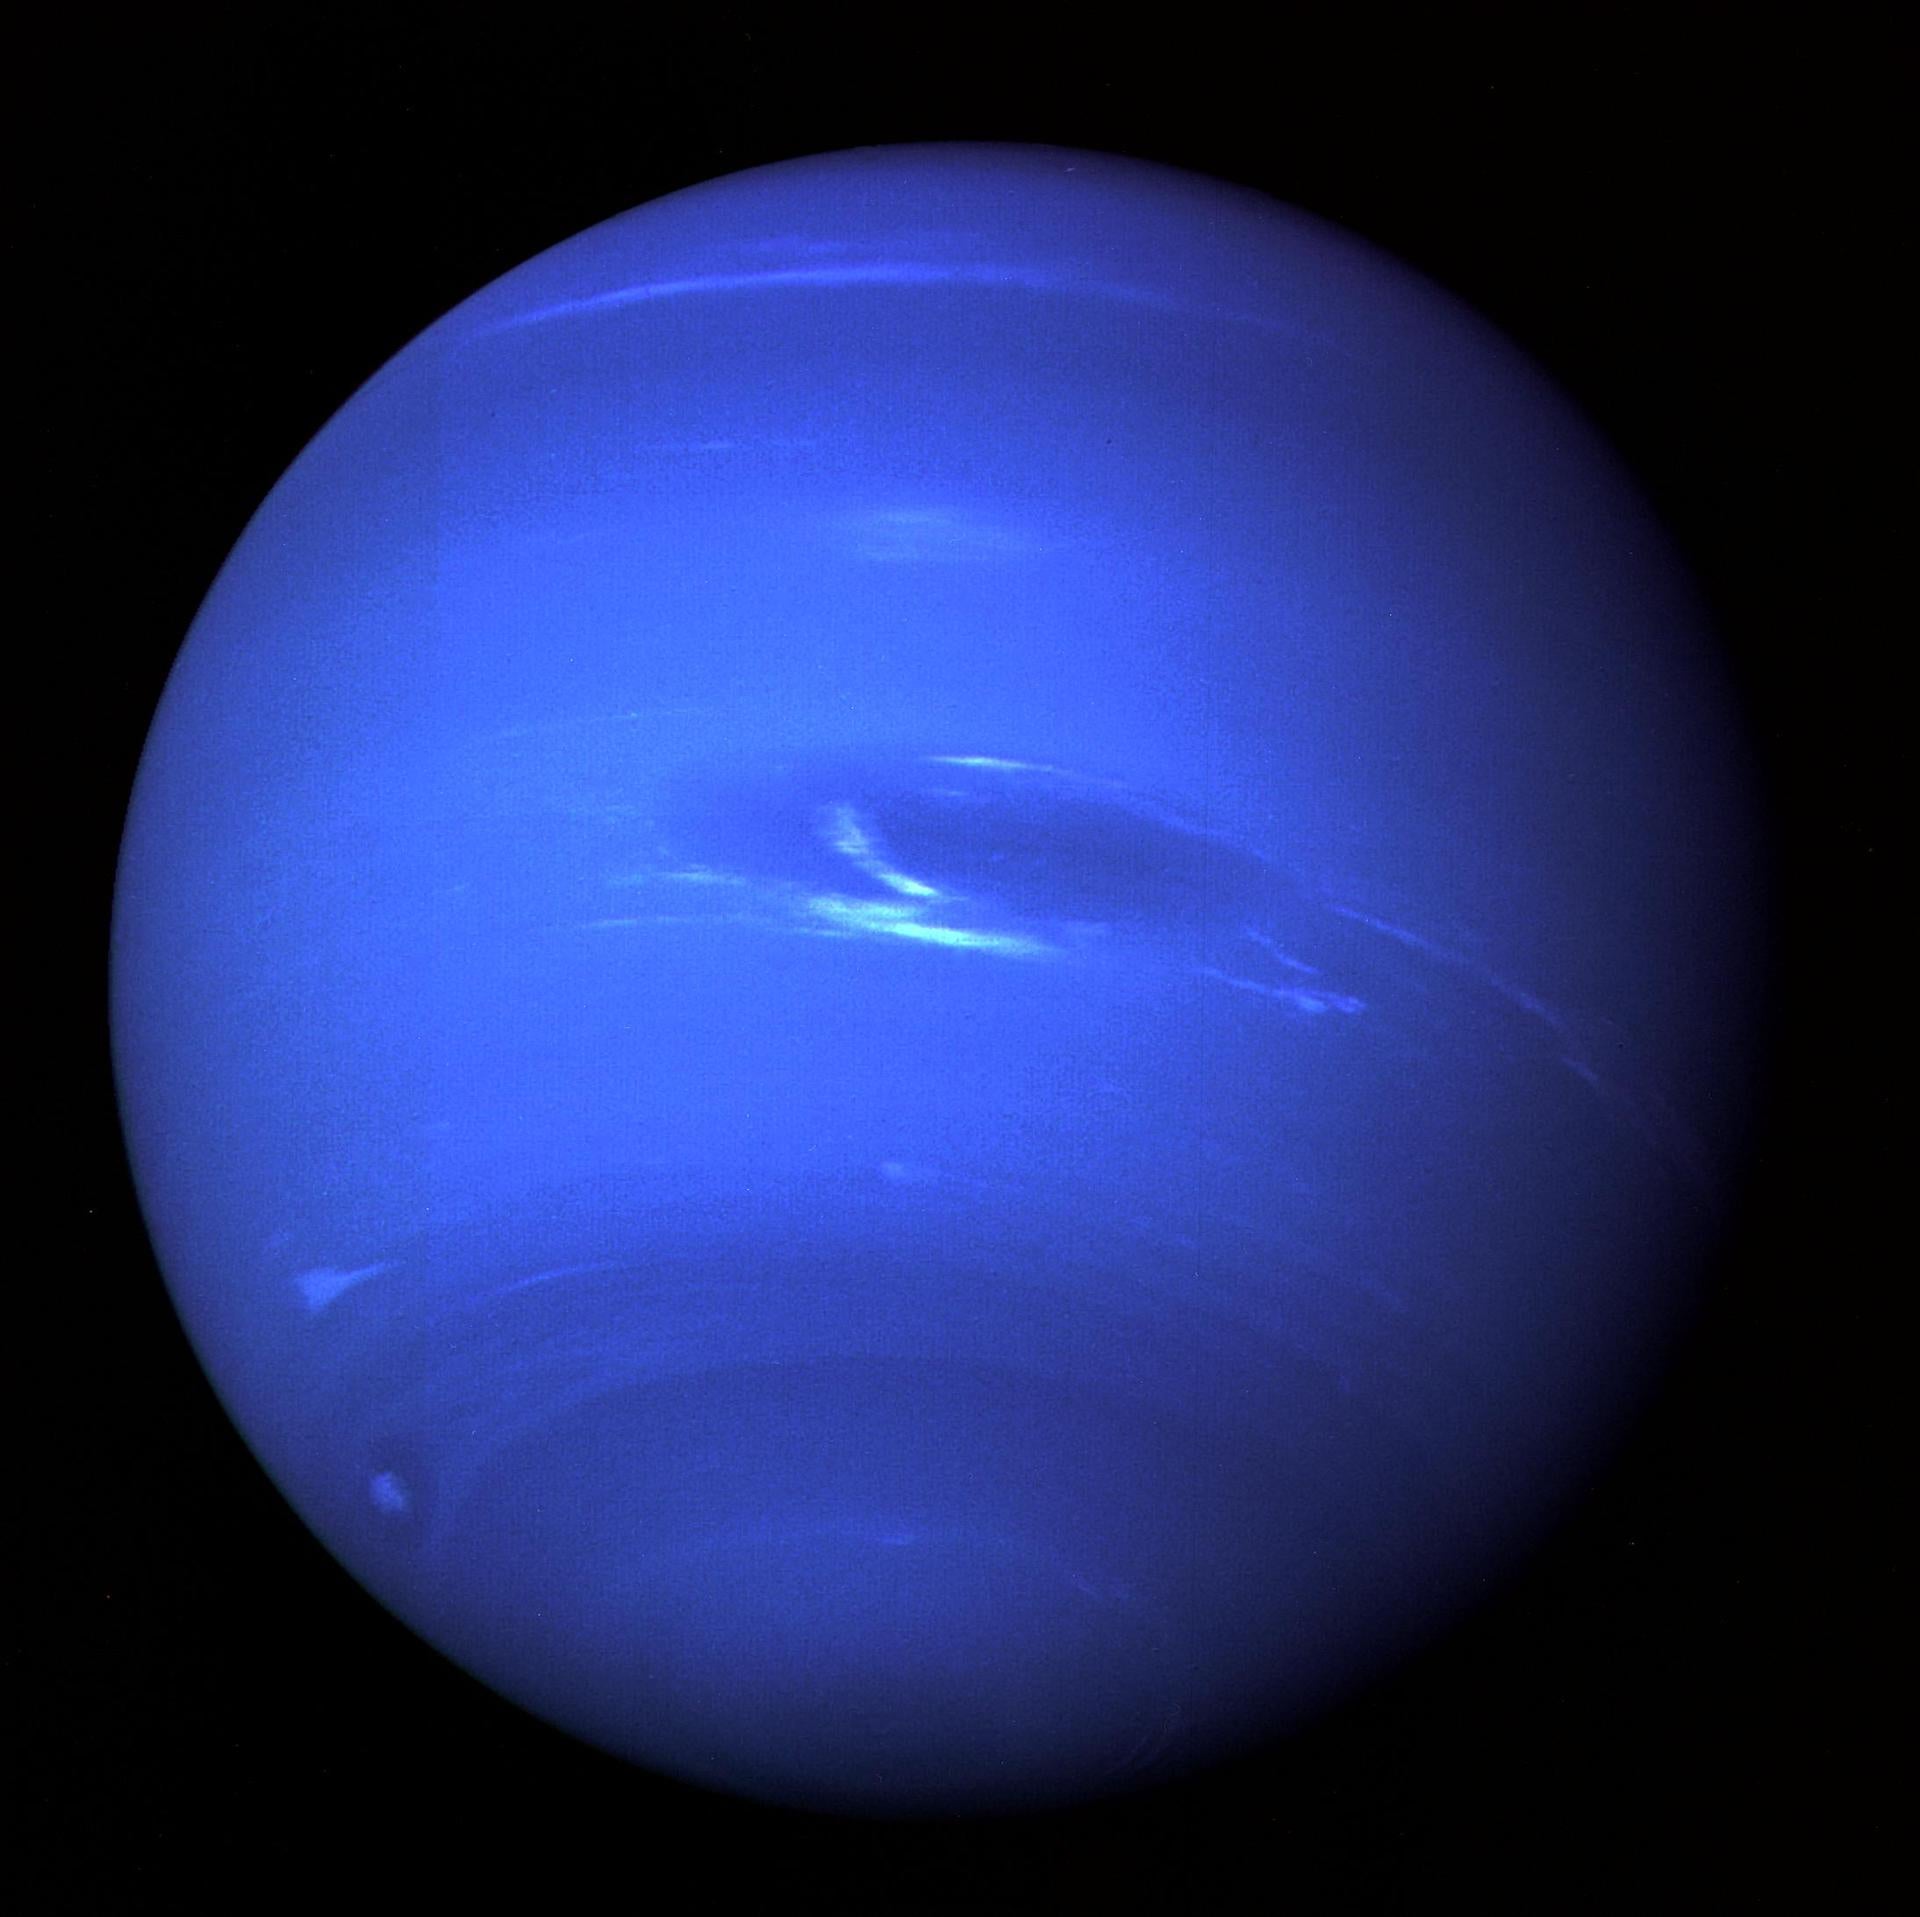 The deep azure atmosphere of Neptune is apparent in this image taken by Voyager 2 in 1989